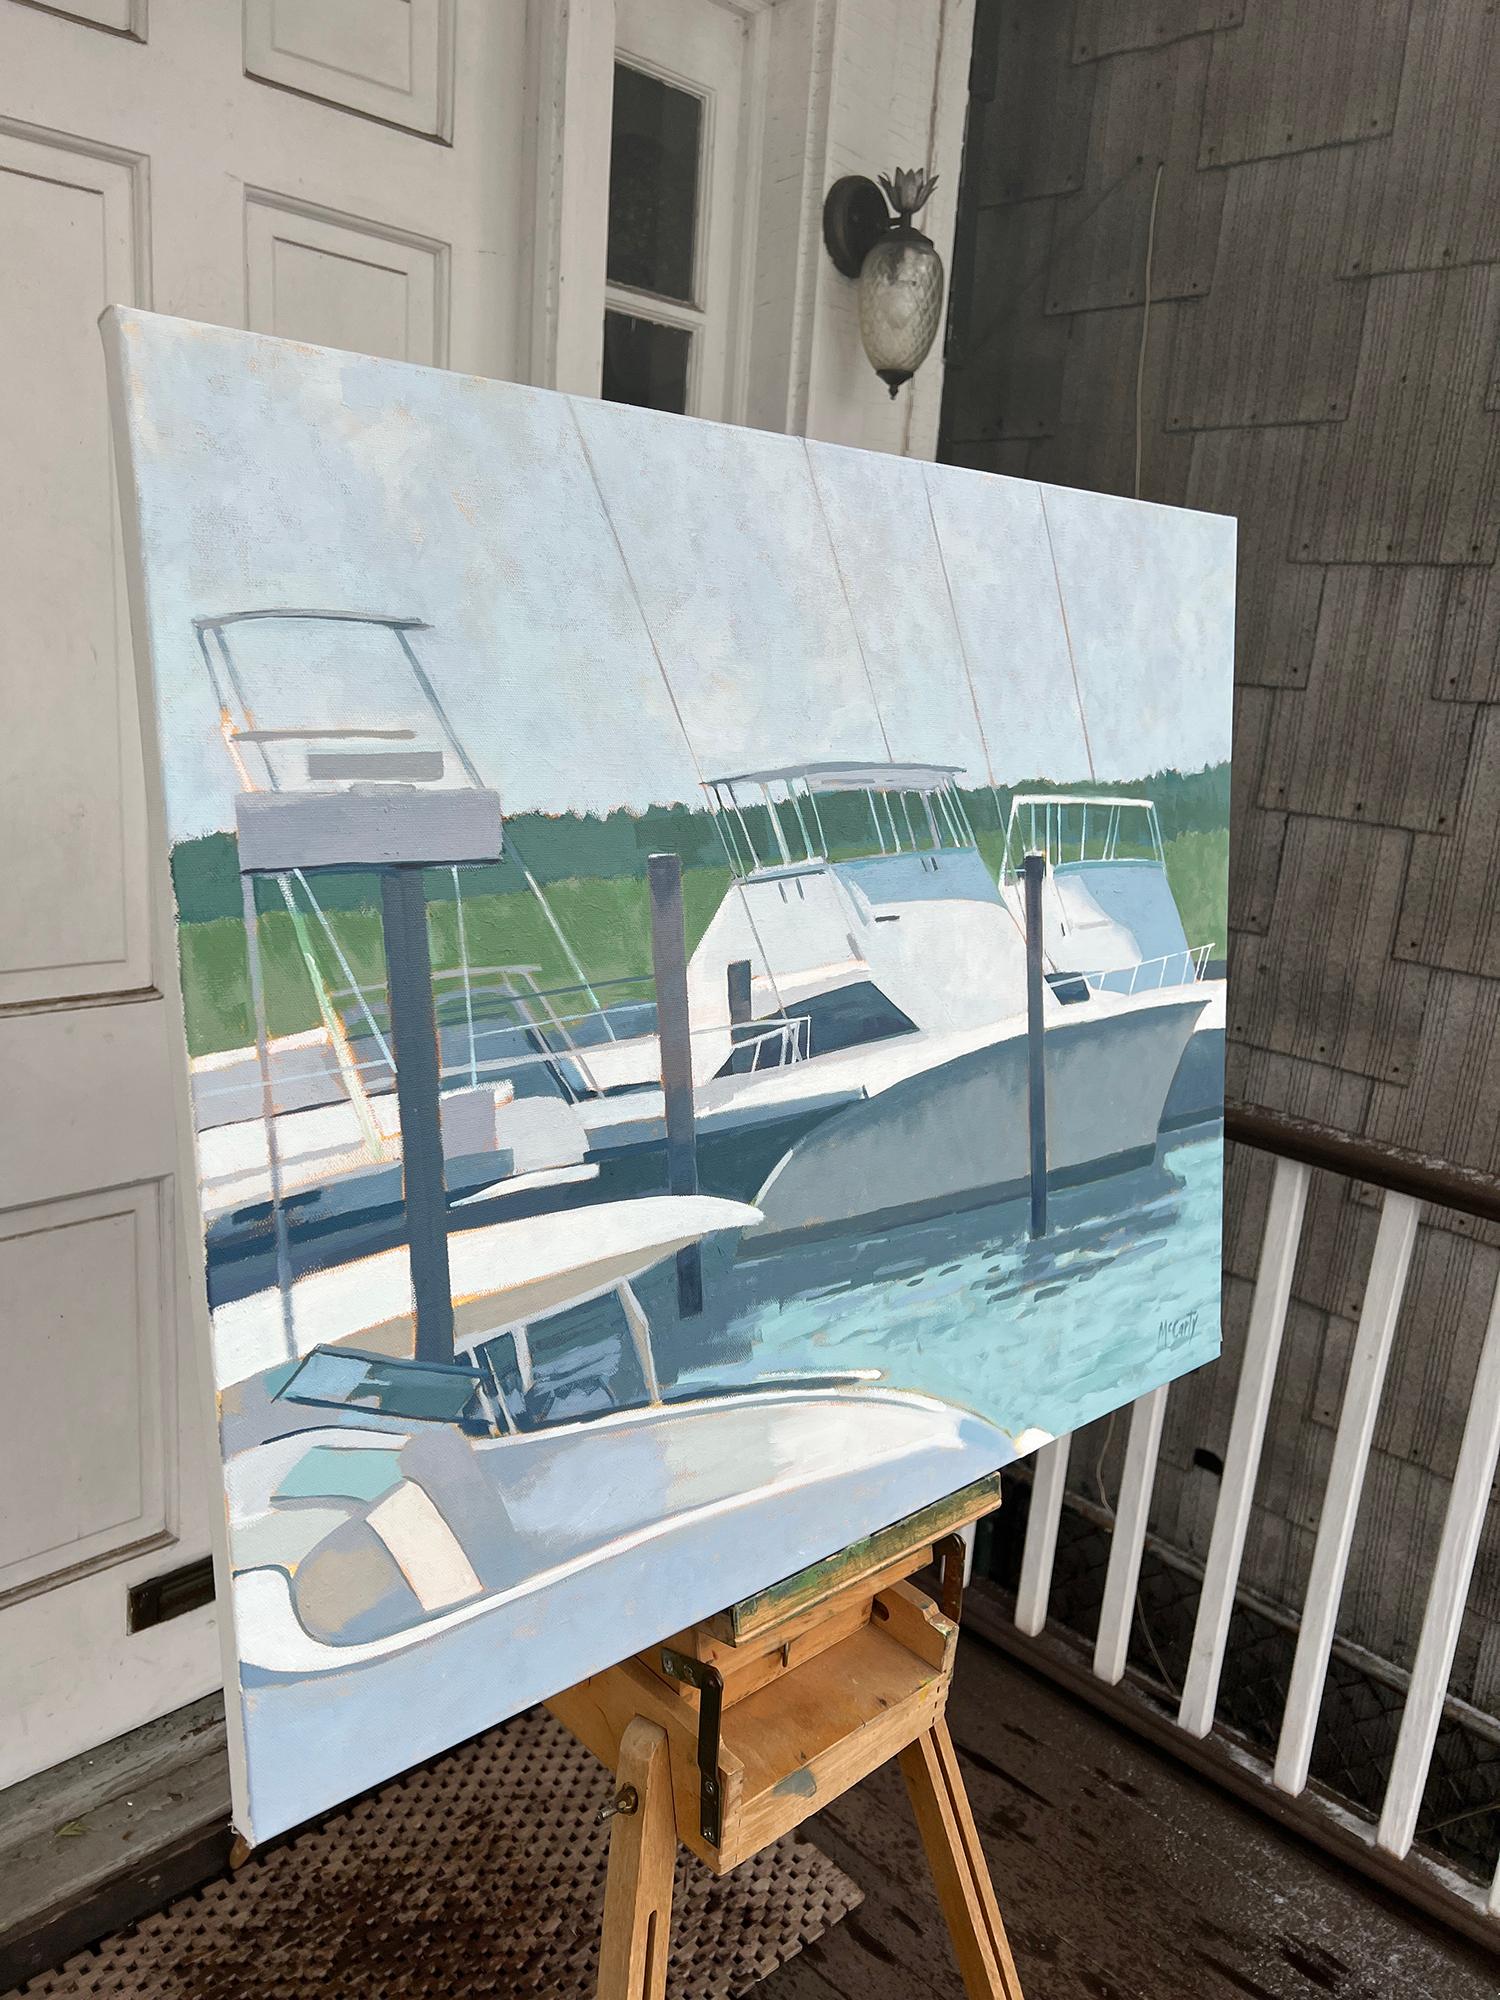 <p>Artist Comments<br>Boats line the Jersey Shore, patiently awaiting passengers for fishing excursions or leisurely sightseeing. The sun bathes the scene in a radiant glow, and the calm water reflects the tranquil atmosphere. Cool blues dominate